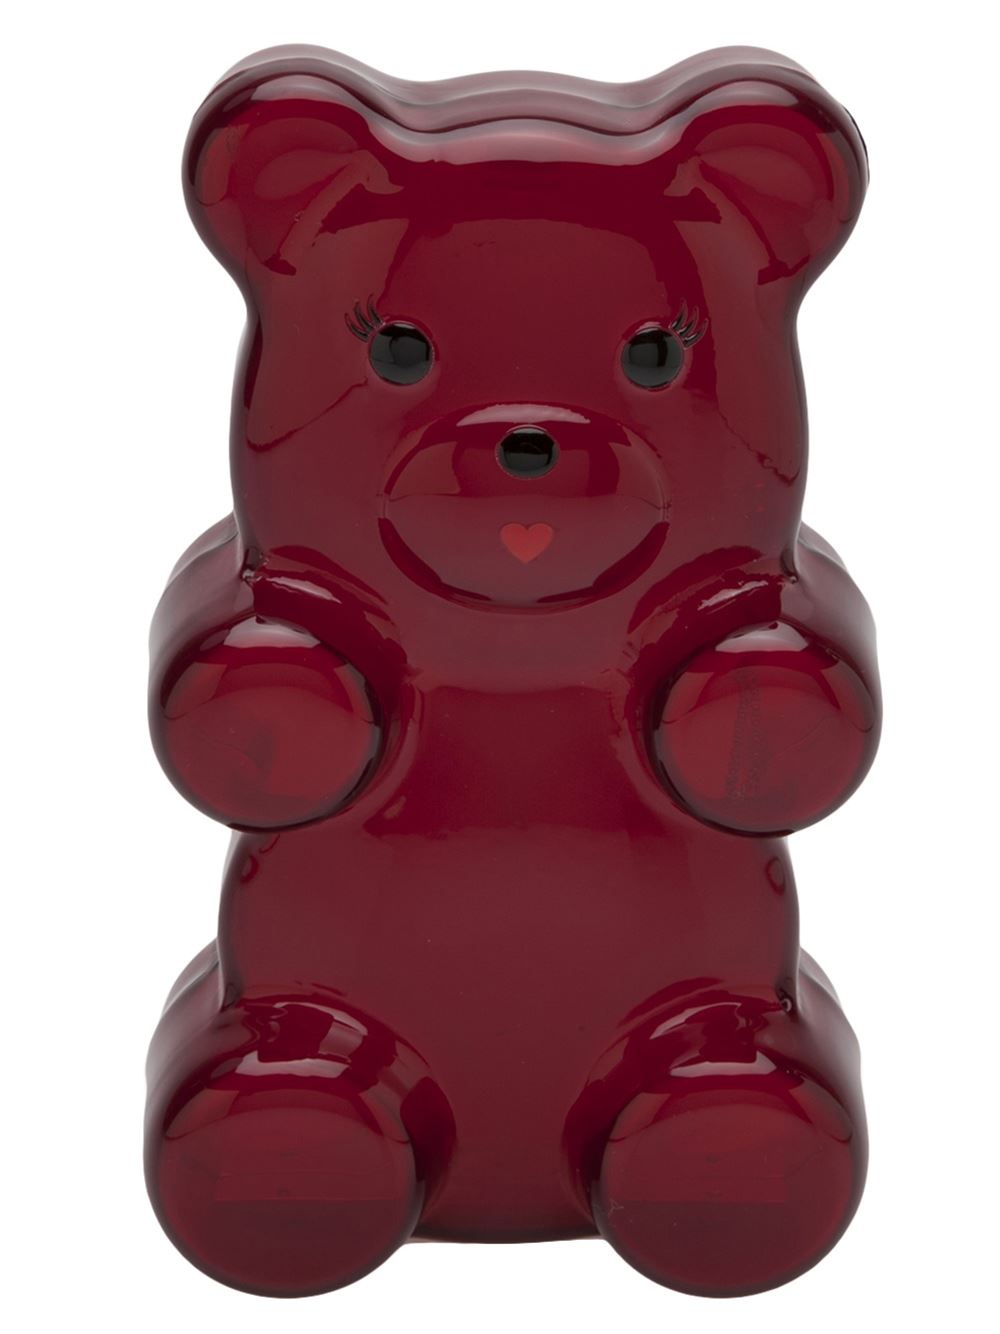 Red Gummi Bear clutch from Charlotte Olympia